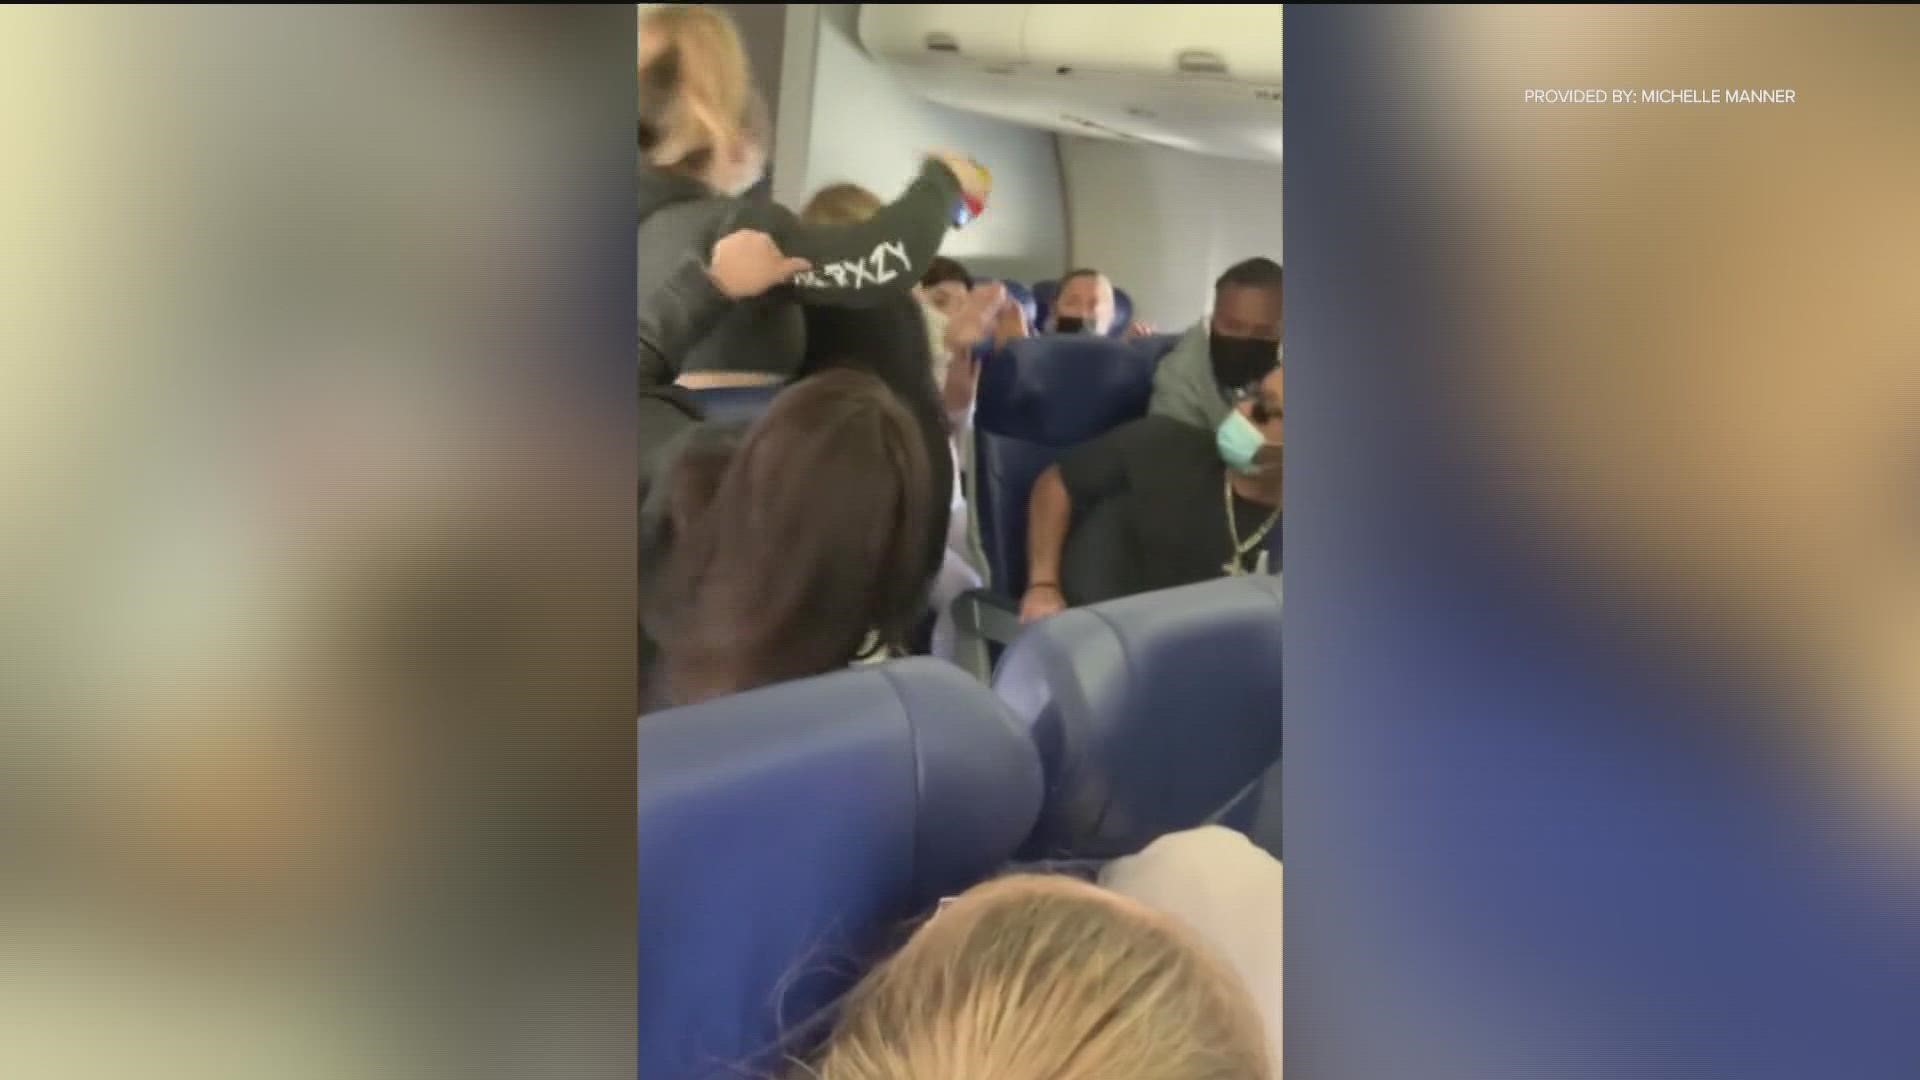 Woman sentenced to 15-months in federal prison for assaulting Southwest Airlines Flight Attendant